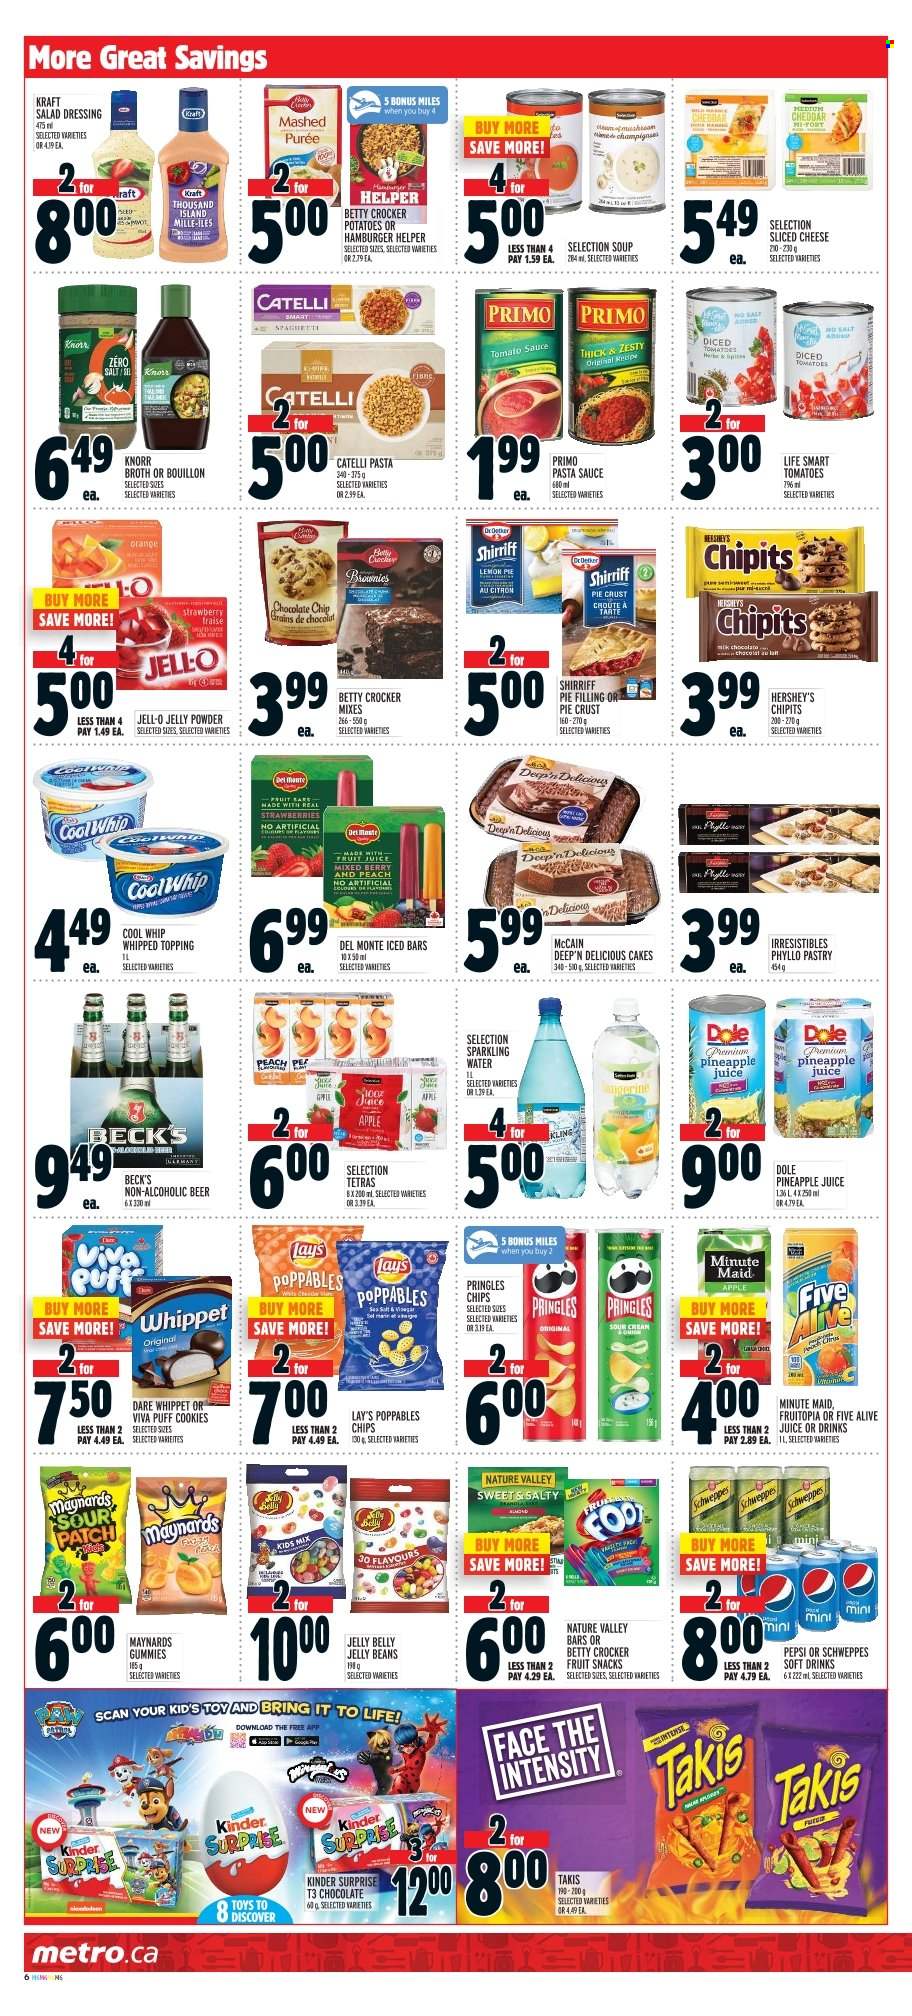 thumbnail - Metro Flyer - March 23, 2023 - March 29, 2023 - Sales products - cake, brownies, Dole, pineapple, oranges, spaghetti, pasta sauce, soup, sauce, Kraft®, sliced cheese, cheese, Cool Whip, Thousand Island dressing, Hershey's, McCain, cookies, chocolate chips, Kinder Surprise, jelly beans, fruit snack, sour patch, Pringles, chips, Lay’s, bouillon, pie crust, pie filling, topping, Jell-O, broth, tomato sauce, diced tomatoes, Del Monte, Nature Valley, salad dressing, dressing, Schweppes, pineapple juice, Pepsi, juice, fruit juice, soft drink, fruit punch, sparkling water, water, beer, Beck's, plant seeds, Knorr. Page 12.